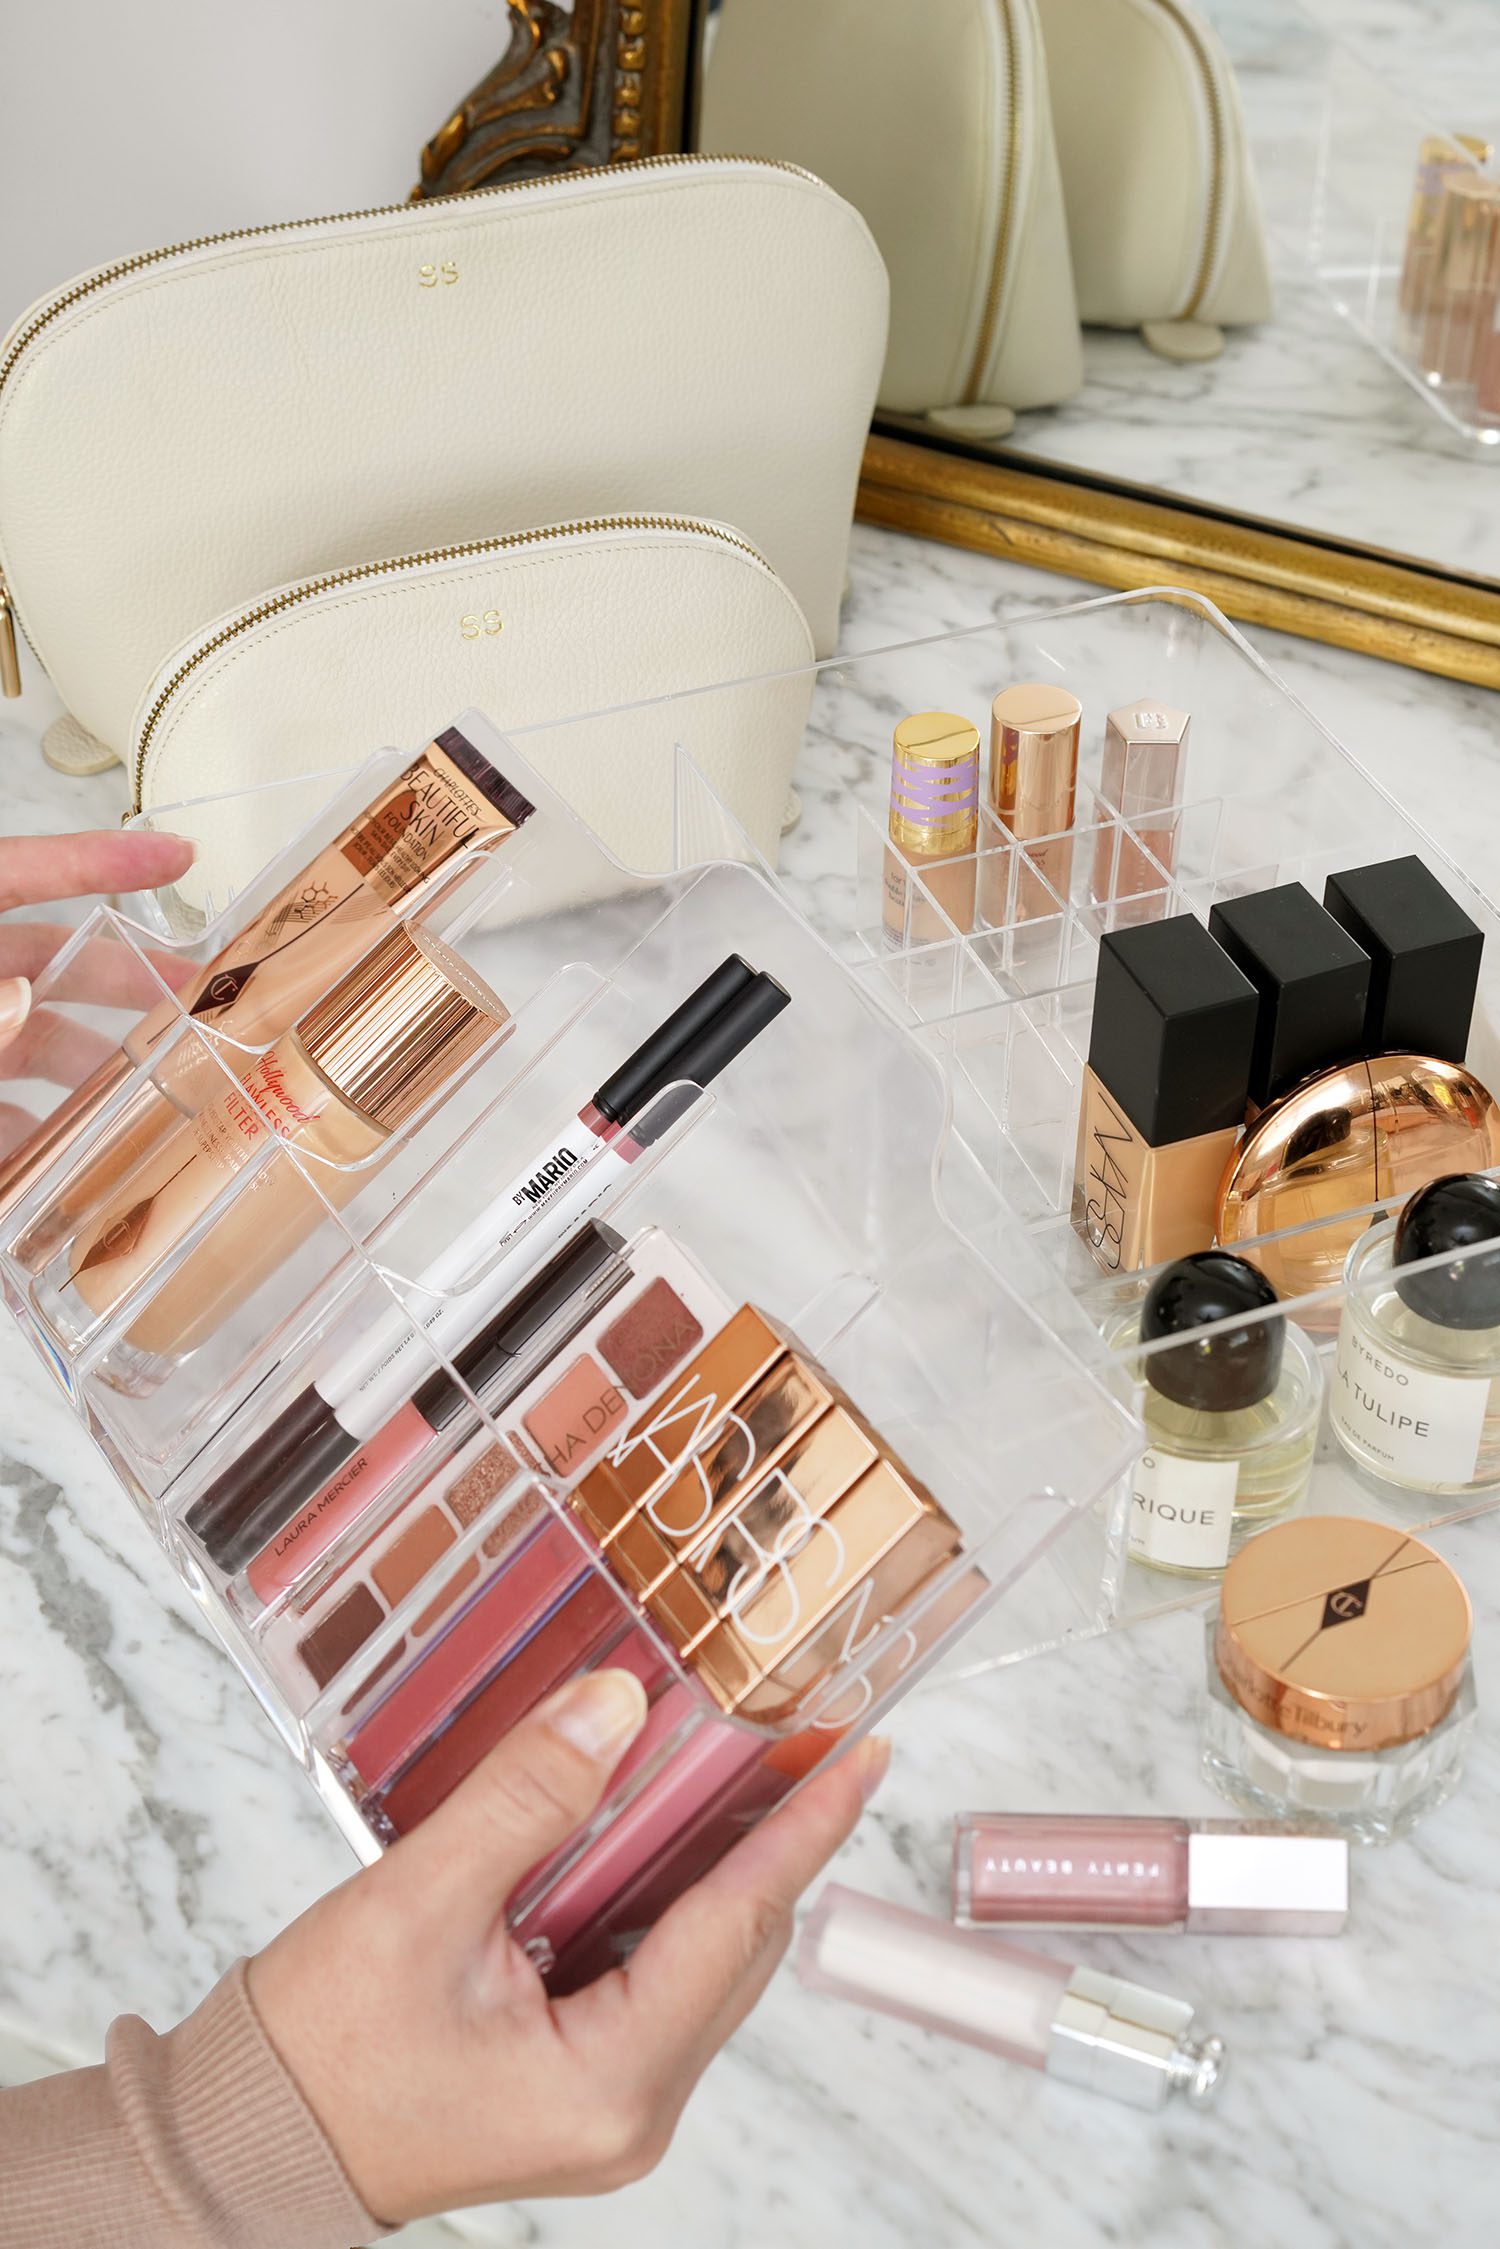 Beauty Organizers To Put On Your Radar - The Beauty Look Book